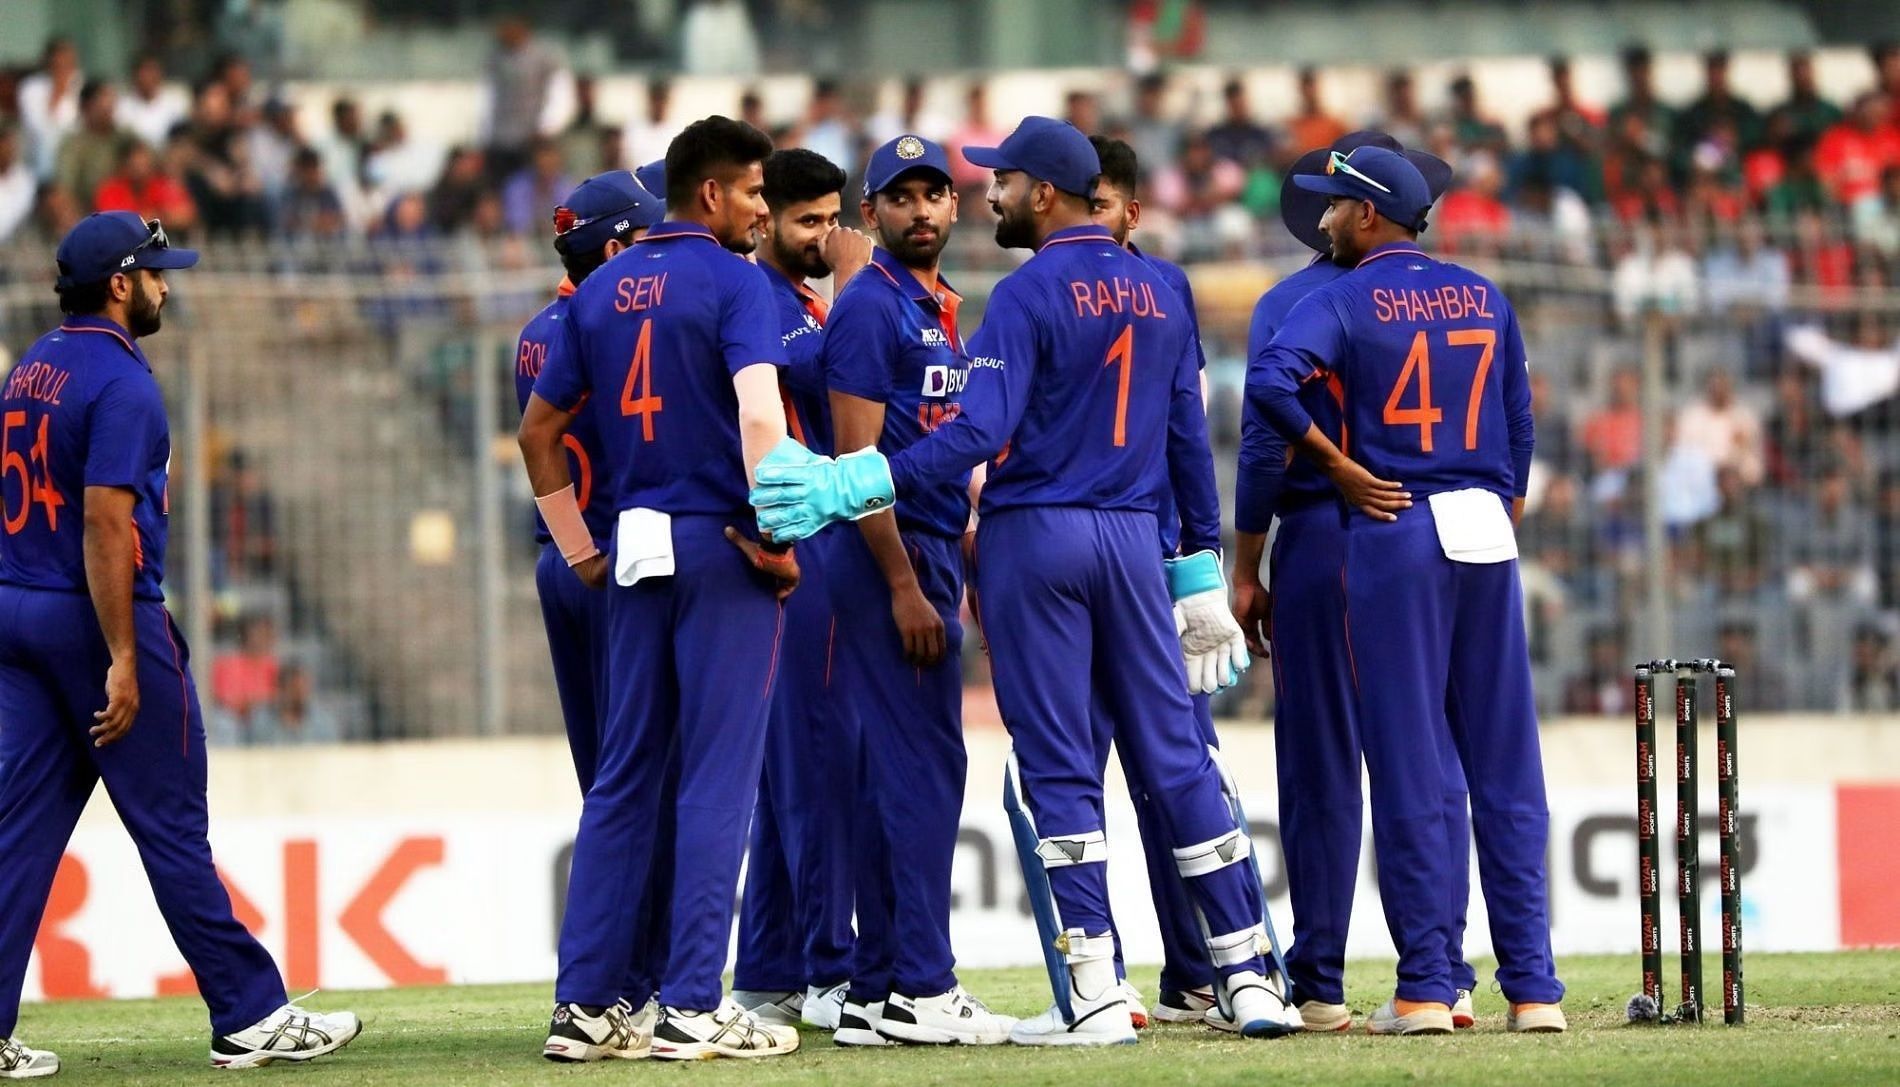 India suffered a one-wicket defeat in the first ODI against Bangladesh. [P/C: BCCI]